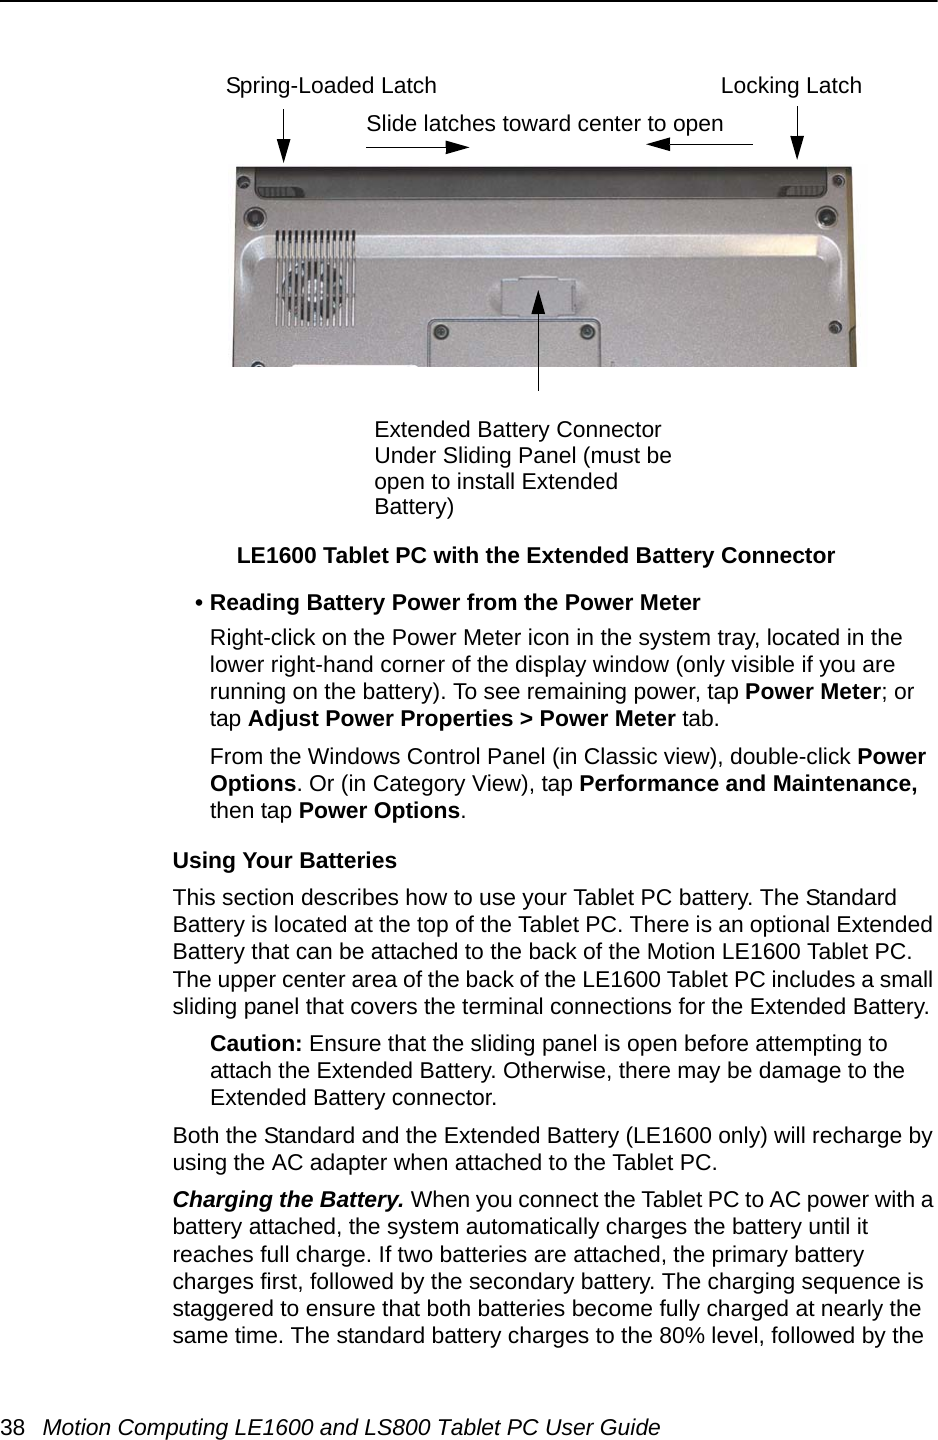 38 Motion Computing LE1600 and LS800 Tablet PC User Guide• Reading Battery Power from the Power MeterRight-click on the Power Meter icon in the system tray, located in the lower right-hand corner of the display window (only visible if you are running on the battery). To see remaining power, tap Power Meter; or tap Adjust Power Properties &gt; Power Meter tab.From the Windows Control Panel (in Classic view), double-click Power Options. Or (in Category View), tap Performance and Maintenance, then tap Power Options.Using Your BatteriesThis section describes how to use your Tablet PC battery. The Standard Battery is located at the top of the Tablet PC. There is an optional Extended Battery that can be attached to the back of the Motion LE1600 Tablet PC. The upper center area of the back of the LE1600 Tablet PC includes a small sliding panel that covers the terminal connections for the Extended Battery. Caution: Ensure that the sliding panel is open before attempting to attach the Extended Battery. Otherwise, there may be damage to the Extended Battery connector.Both the Standard and the Extended Battery (LE1600 only) will recharge by using the AC adapter when attached to the Tablet PC.Charging the Battery. When you connect the Tablet PC to AC power with a battery attached, the system automatically charges the battery until it reaches full charge. If two batteries are attached, the primary battery charges first, followed by the secondary battery. The charging sequence is staggered to ensure that both batteries become fully charged at nearly the same time. The standard battery charges to the 80% level, followed by the Spring-Loaded Latch Locking LatchExtended Battery ConnectorUnder Sliding Panel (must be open to install Extended Battery)Slide latches toward center to openLE1600 Tablet PC with the Extended Battery Connector